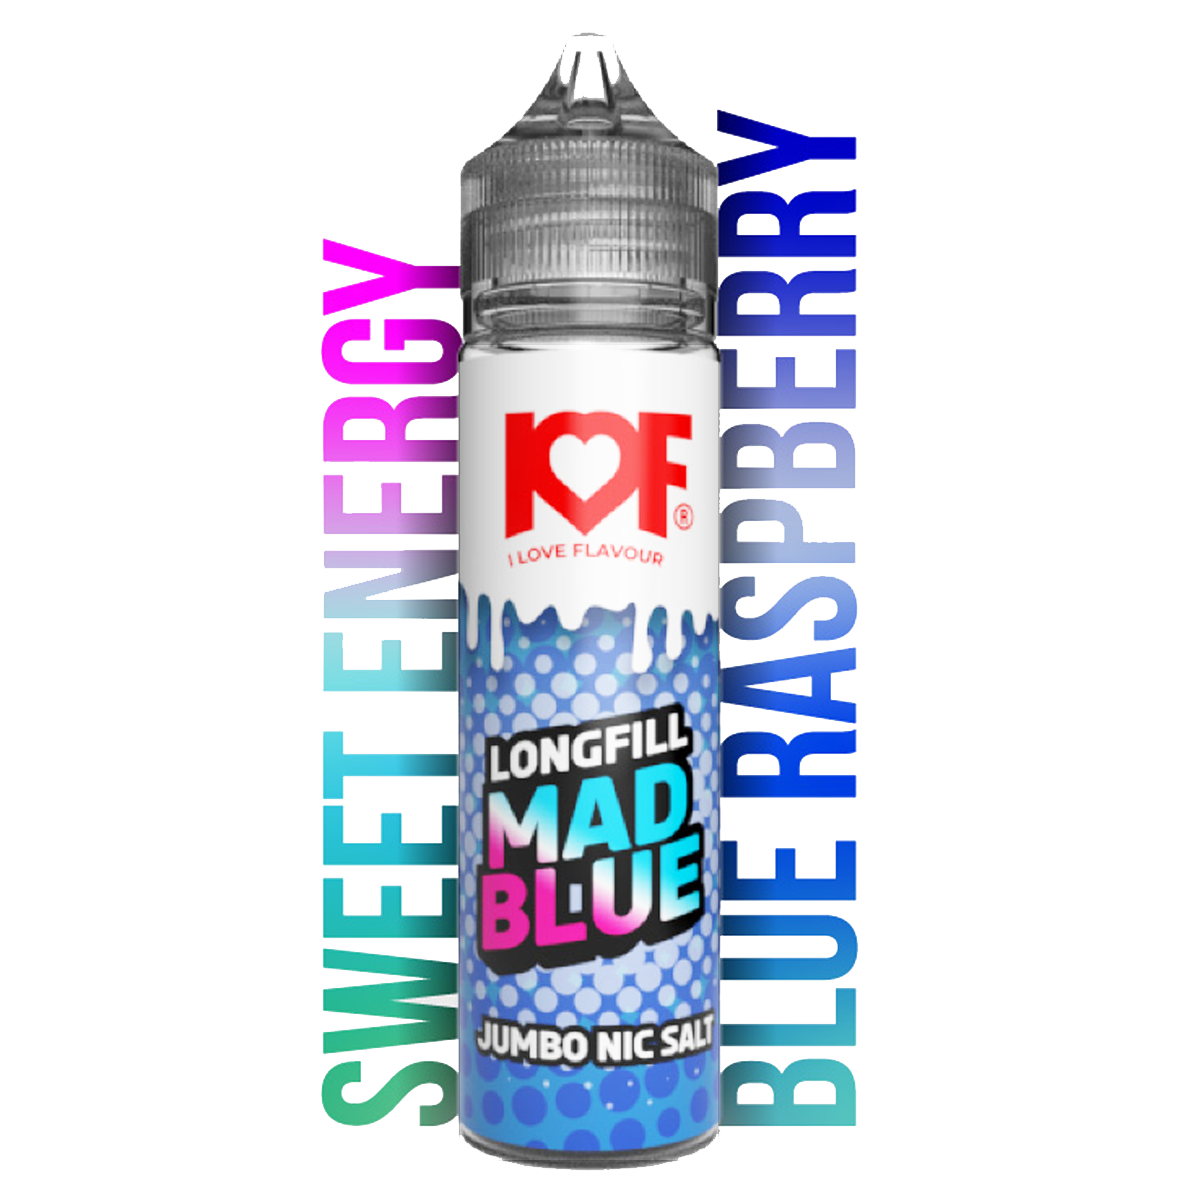 I Love Flavour - Mad Blue 60ml Longfill